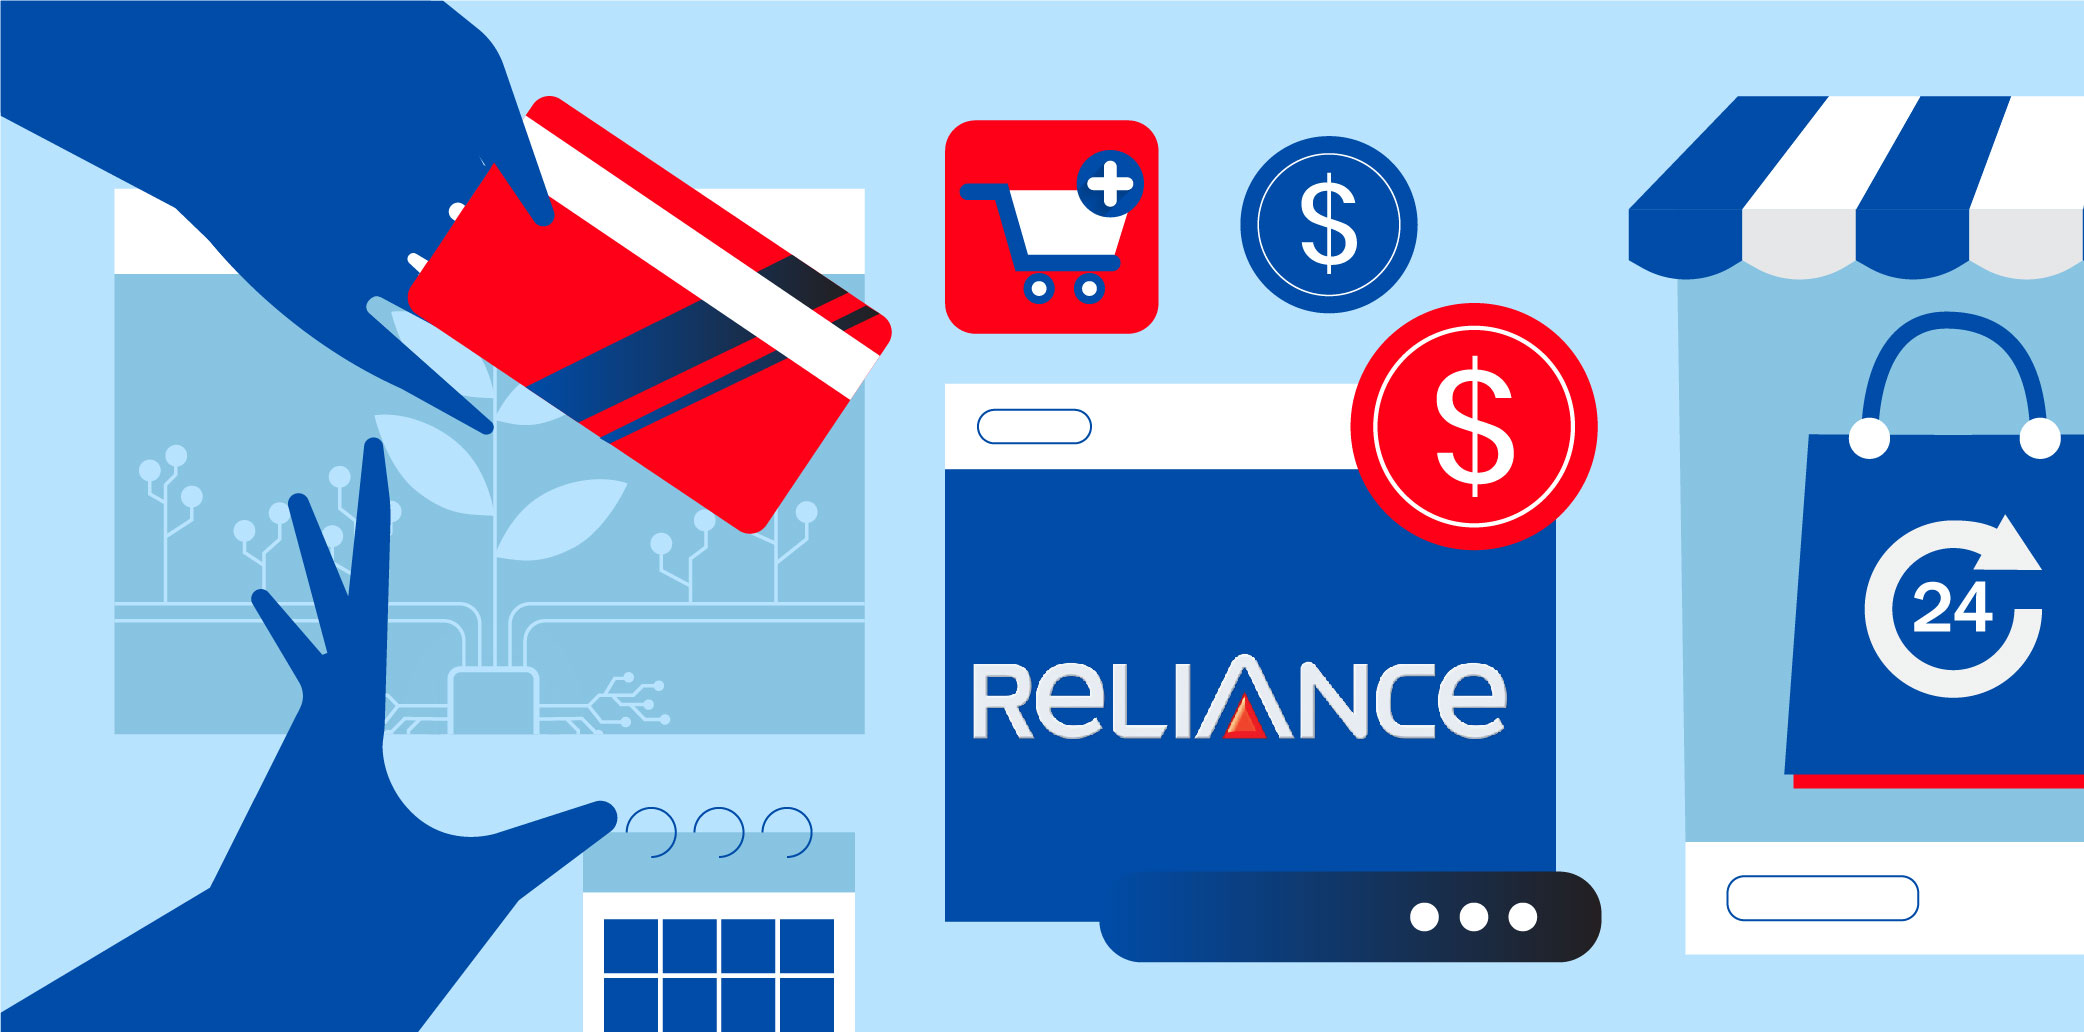 Reliance ventures into quick commerce with USD 200 million investment in Dunzo